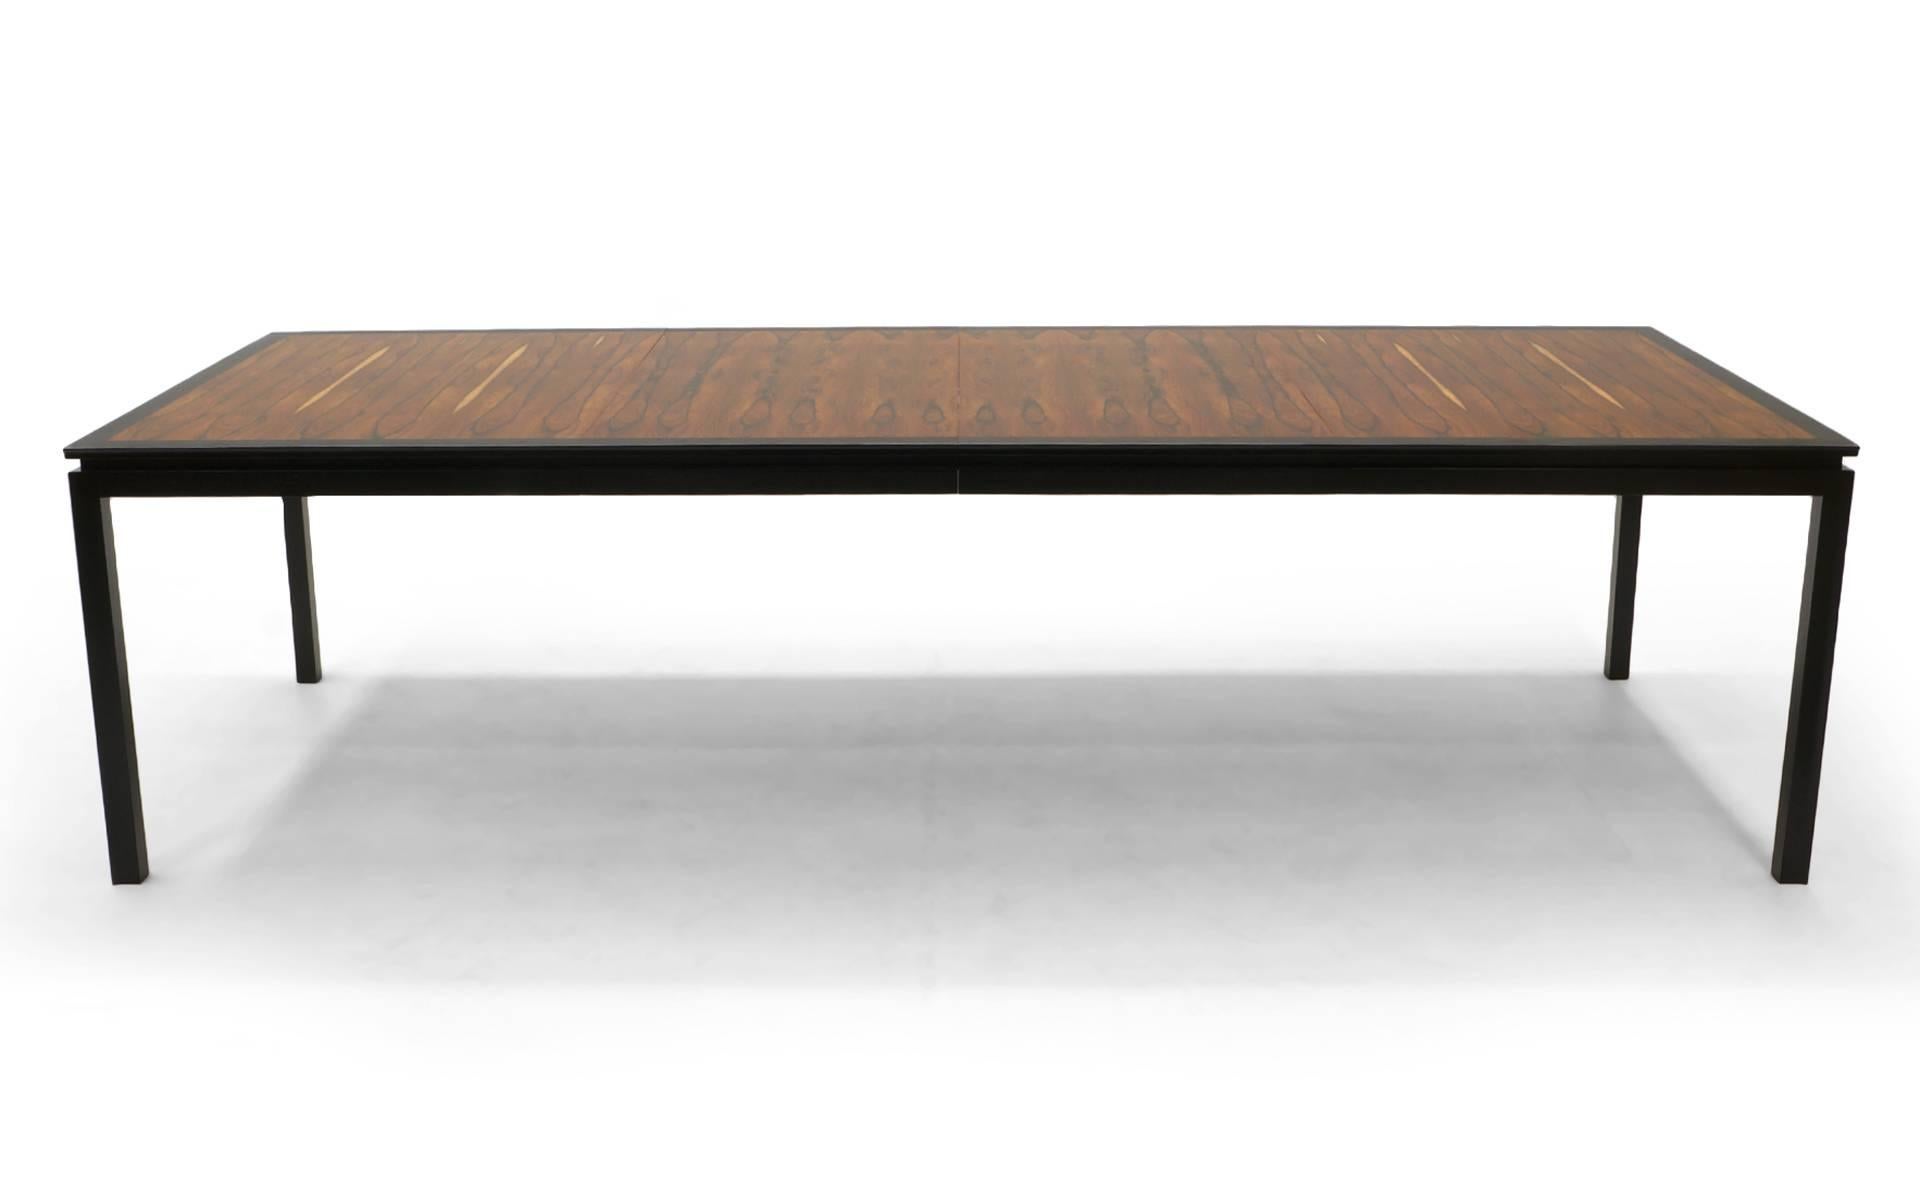 Edward Wormley for Dunbar Brazilian rosewood dining table. Table is 66 inches long and has two 19 inch leaves thus expanding up to 114 inches. Expertly restored and refinished. It is extremely rare to find this design in Brazilian rosewood. This is